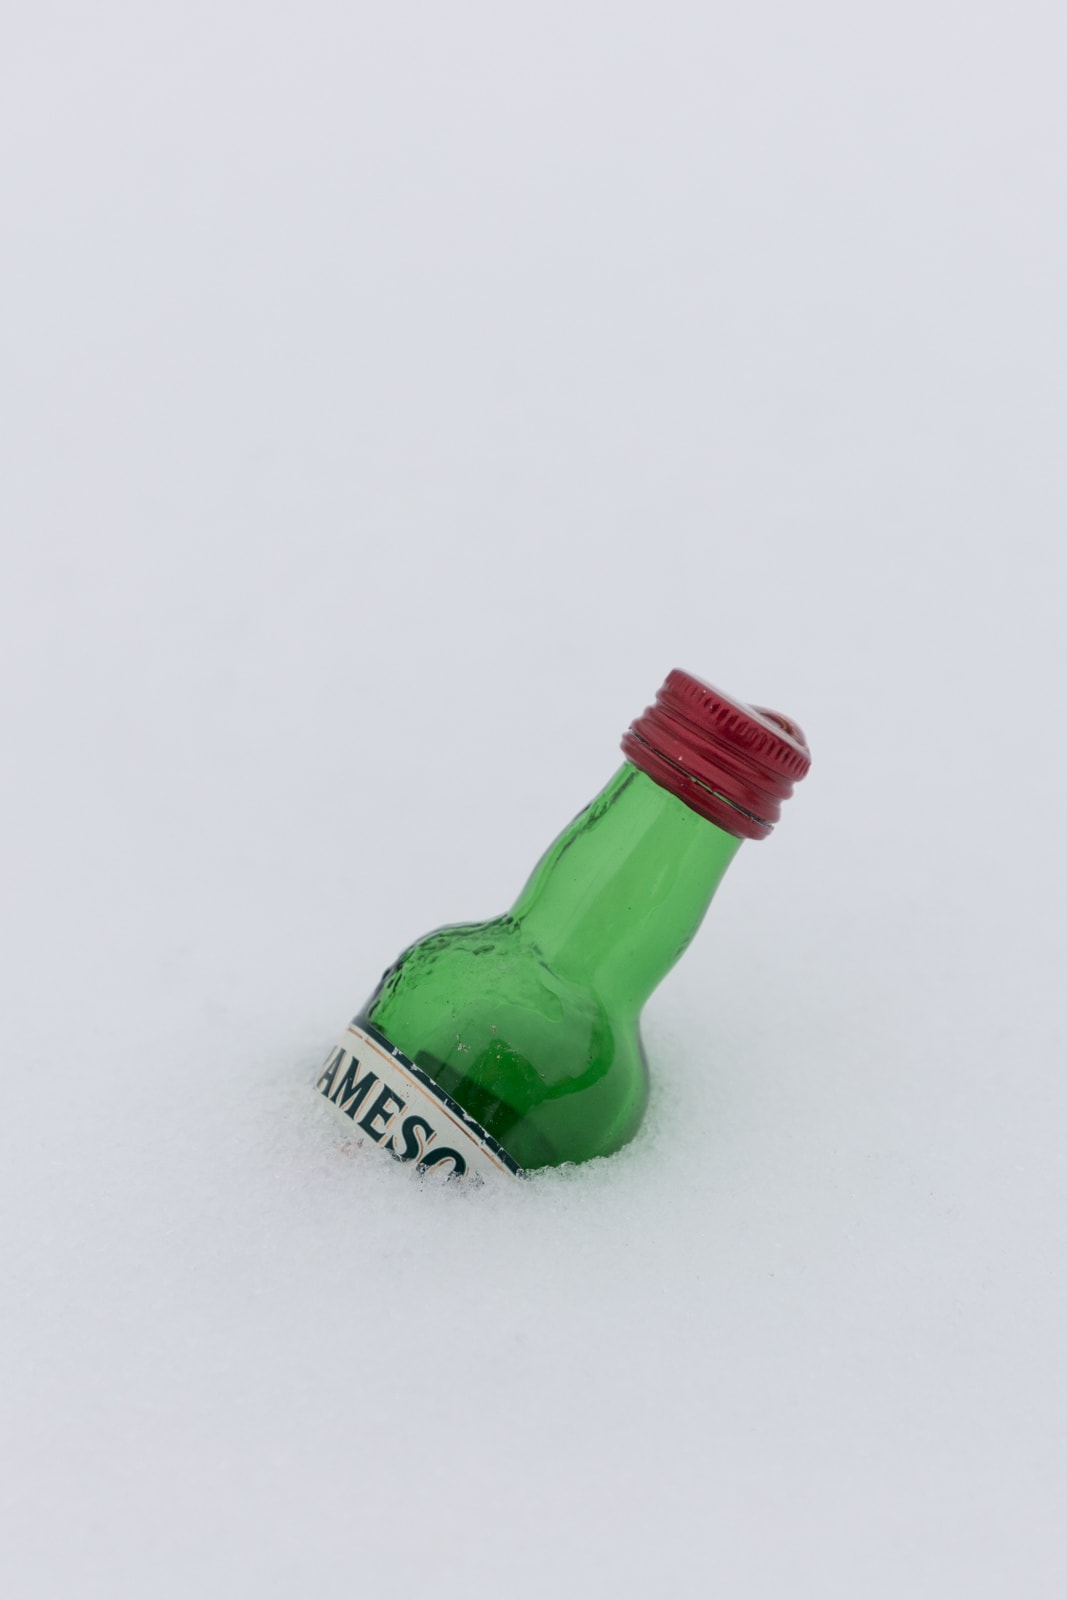 A miniature bottle of Jameson Whisky in the snow